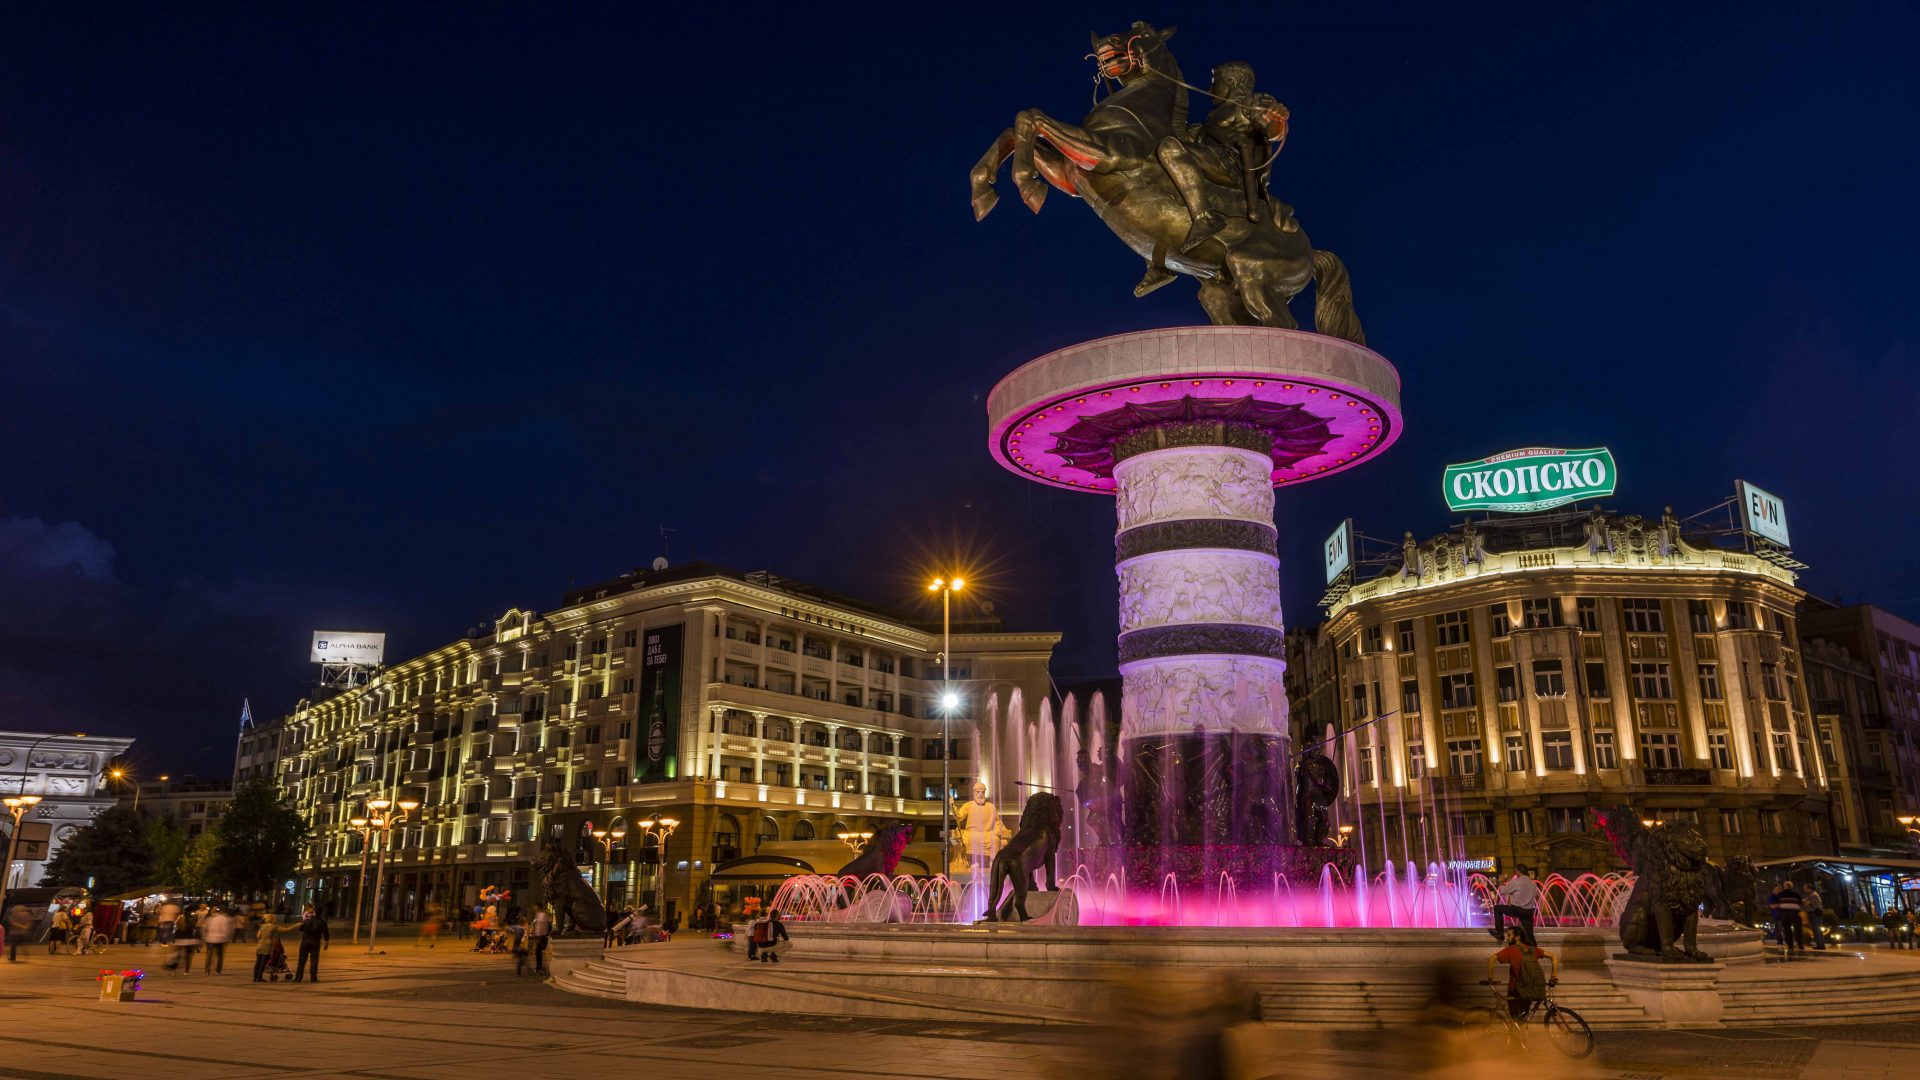 Macedonia Square Fountain And Monument Of Alexander